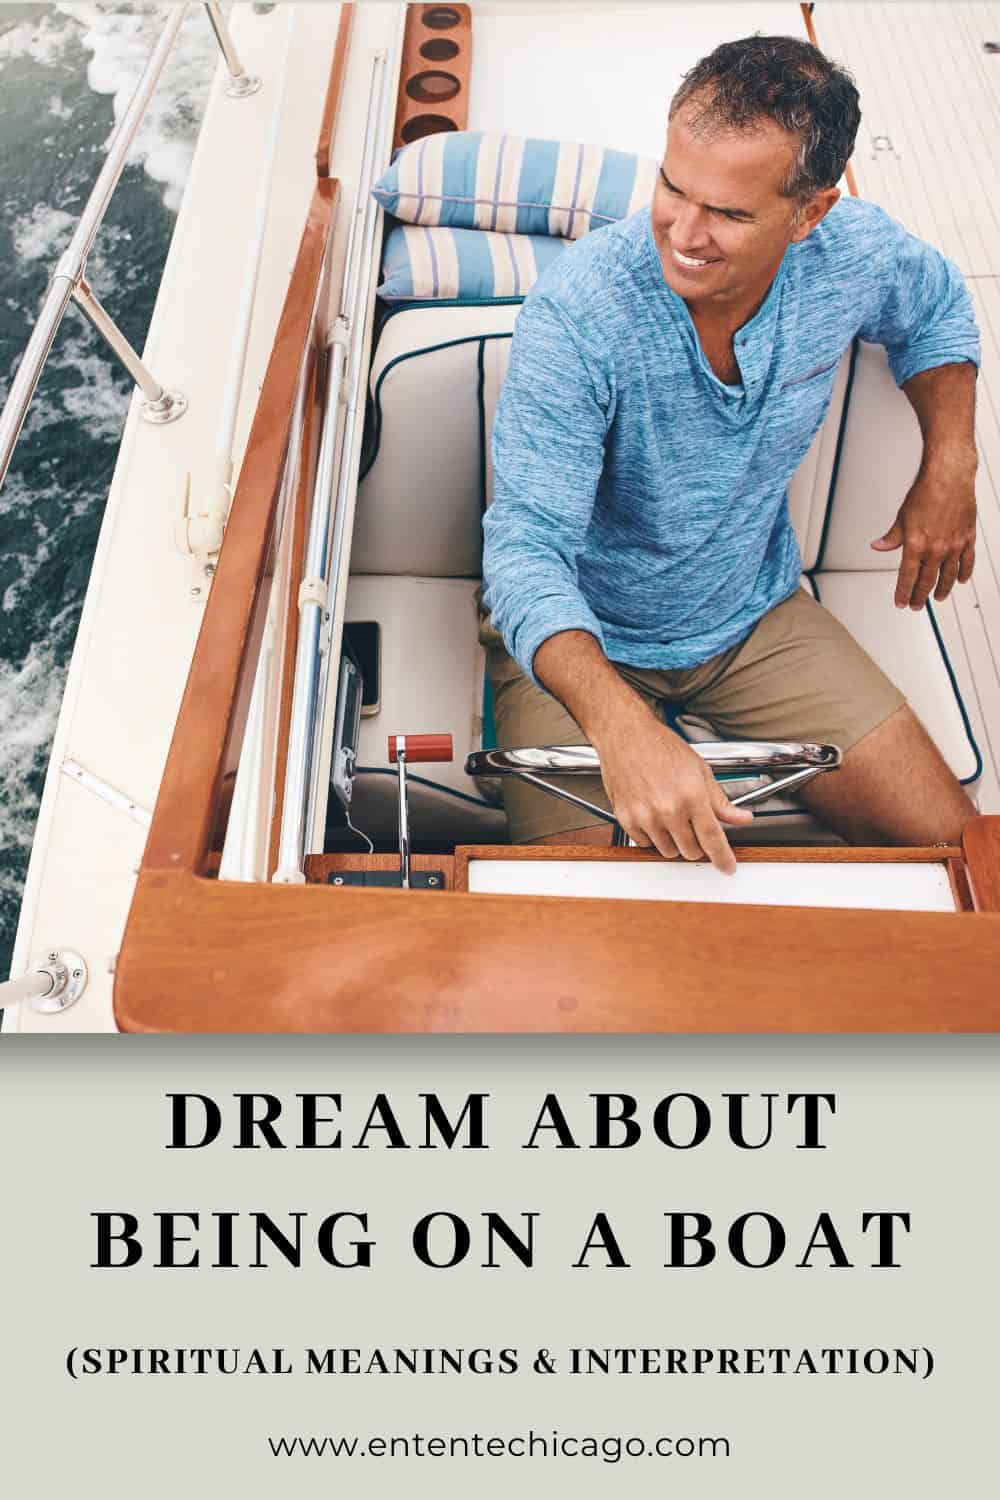 Ten meanings when you dream of a boat